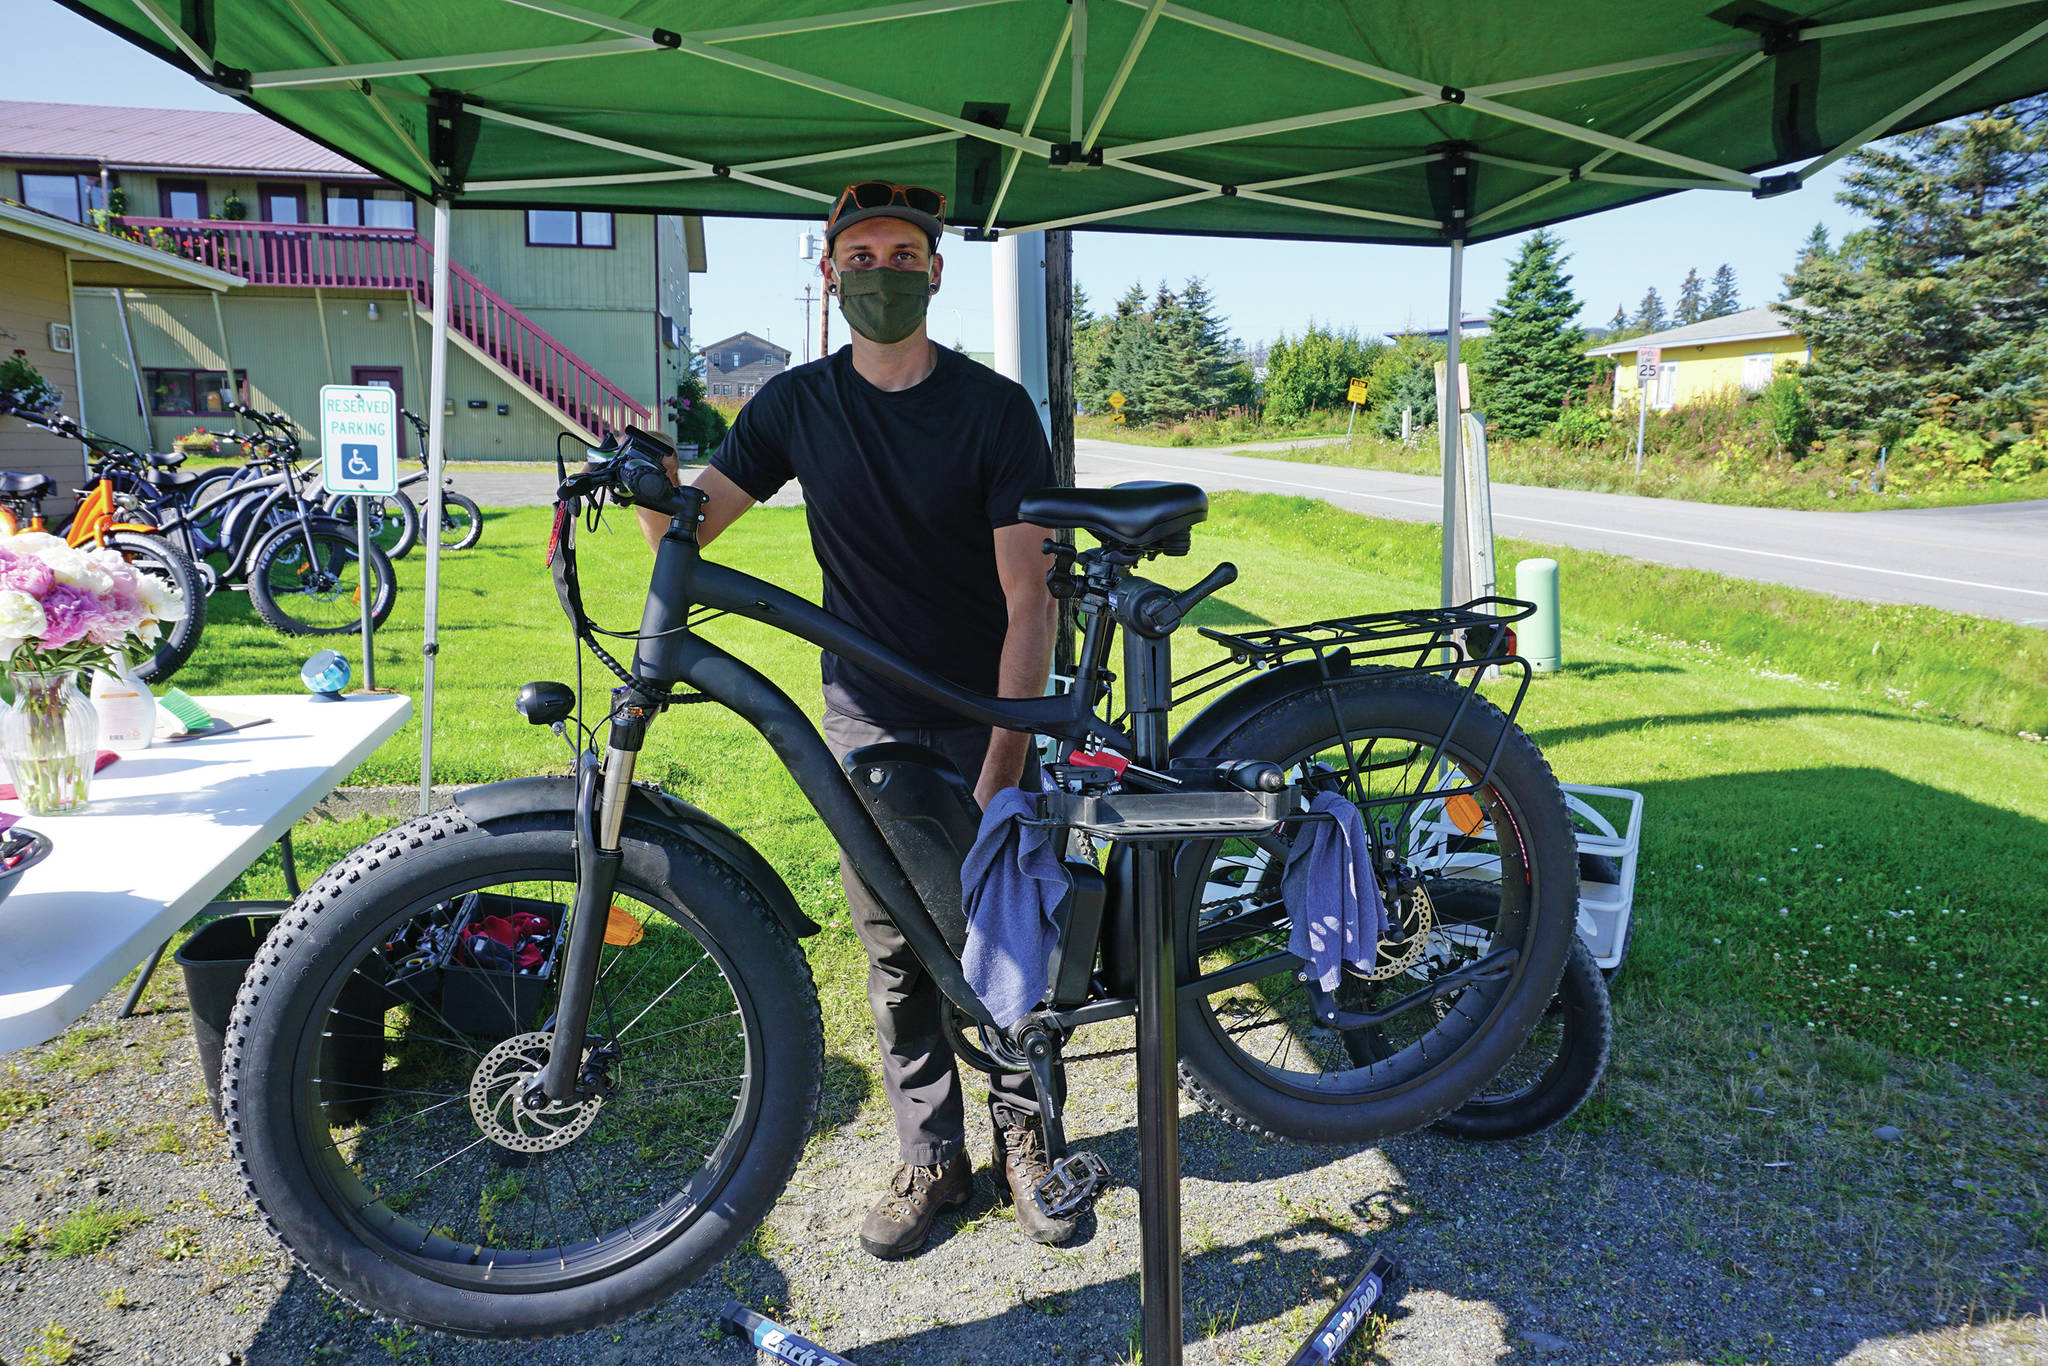 Chase Warren, the bike mechanic for LoopEride, displays some of the electric-motor assist bicycles at an open house held Friday, Aug. 21, 2020, at the company’s showroom on East Bunnell Avenue in Homer, Alaska. (Photo by Michael Armstrong/Homer News)